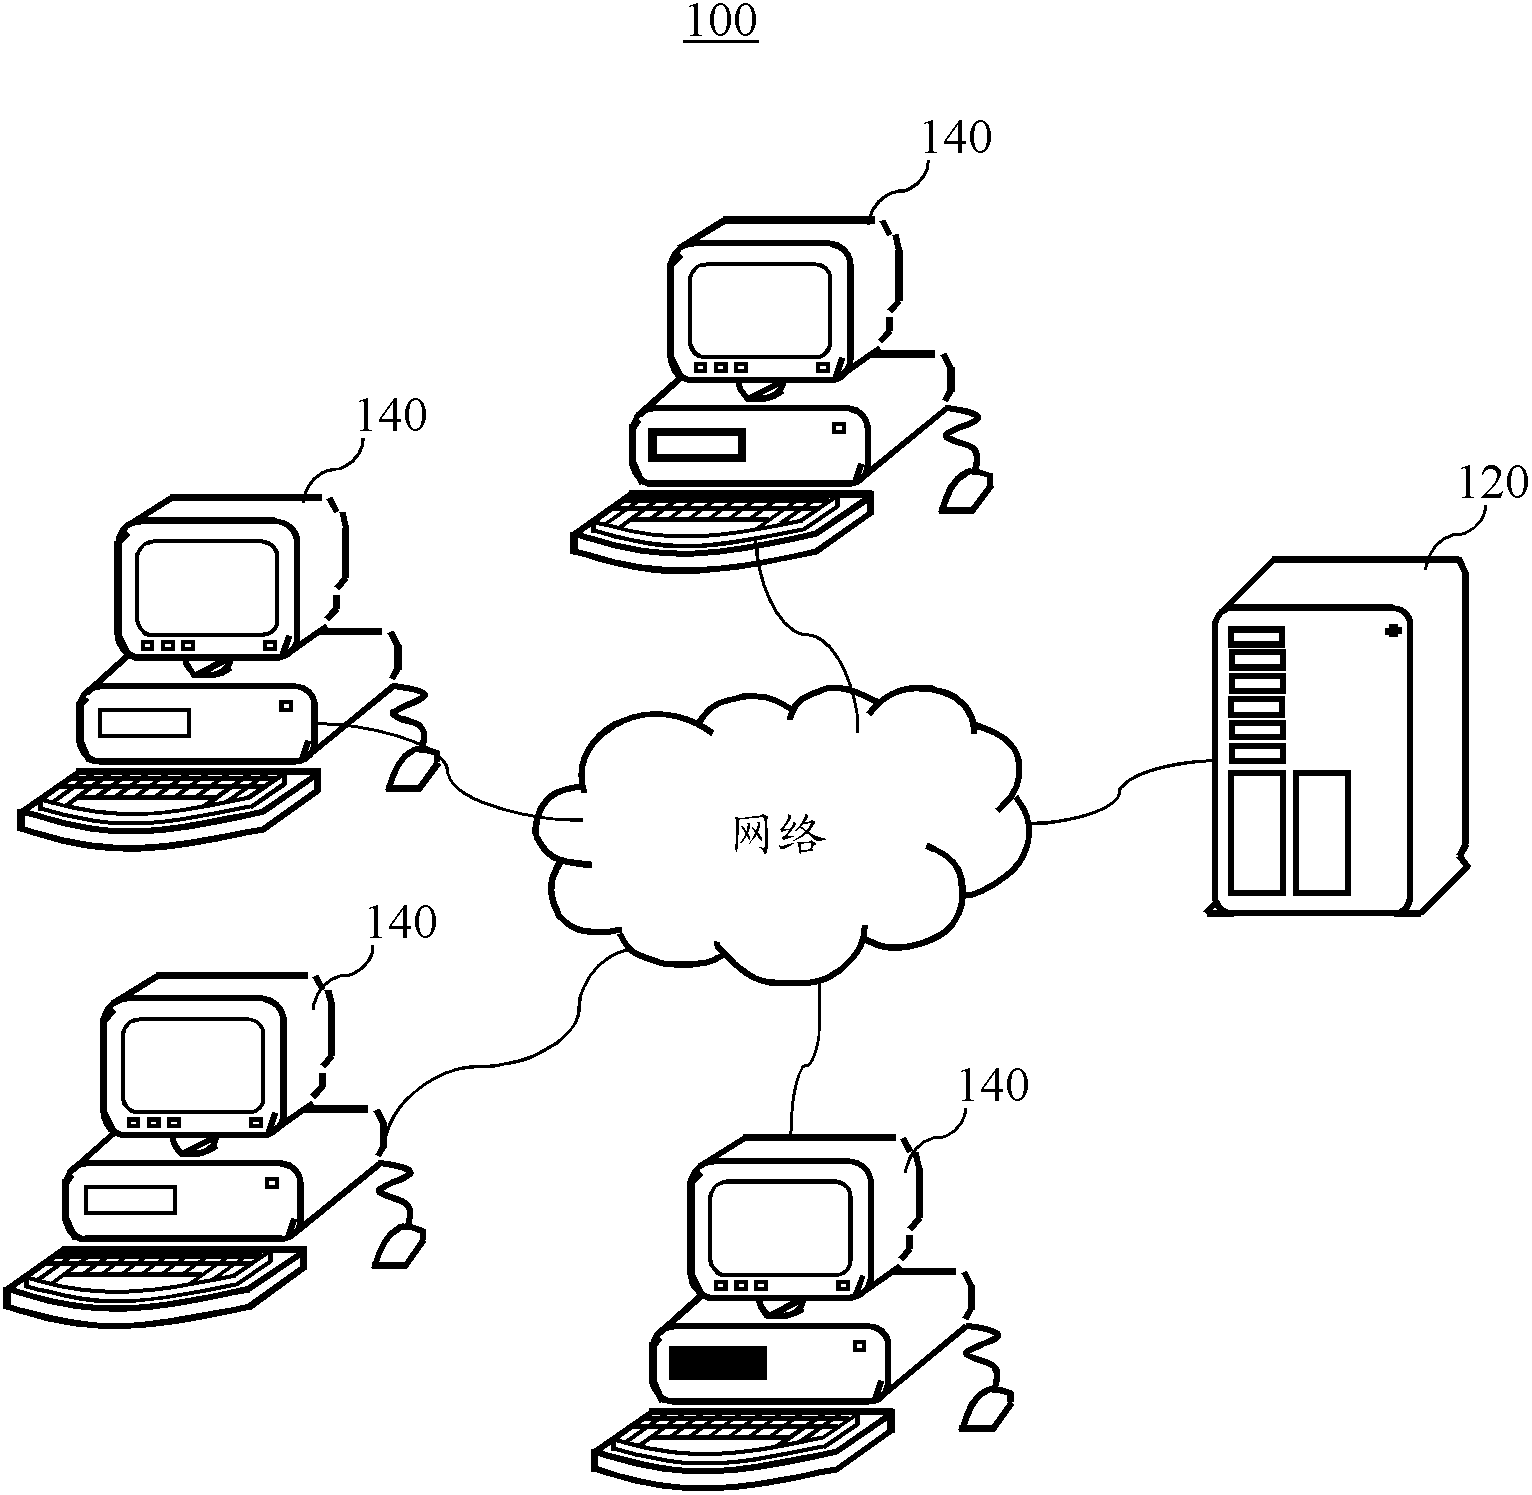 Method for combining documents